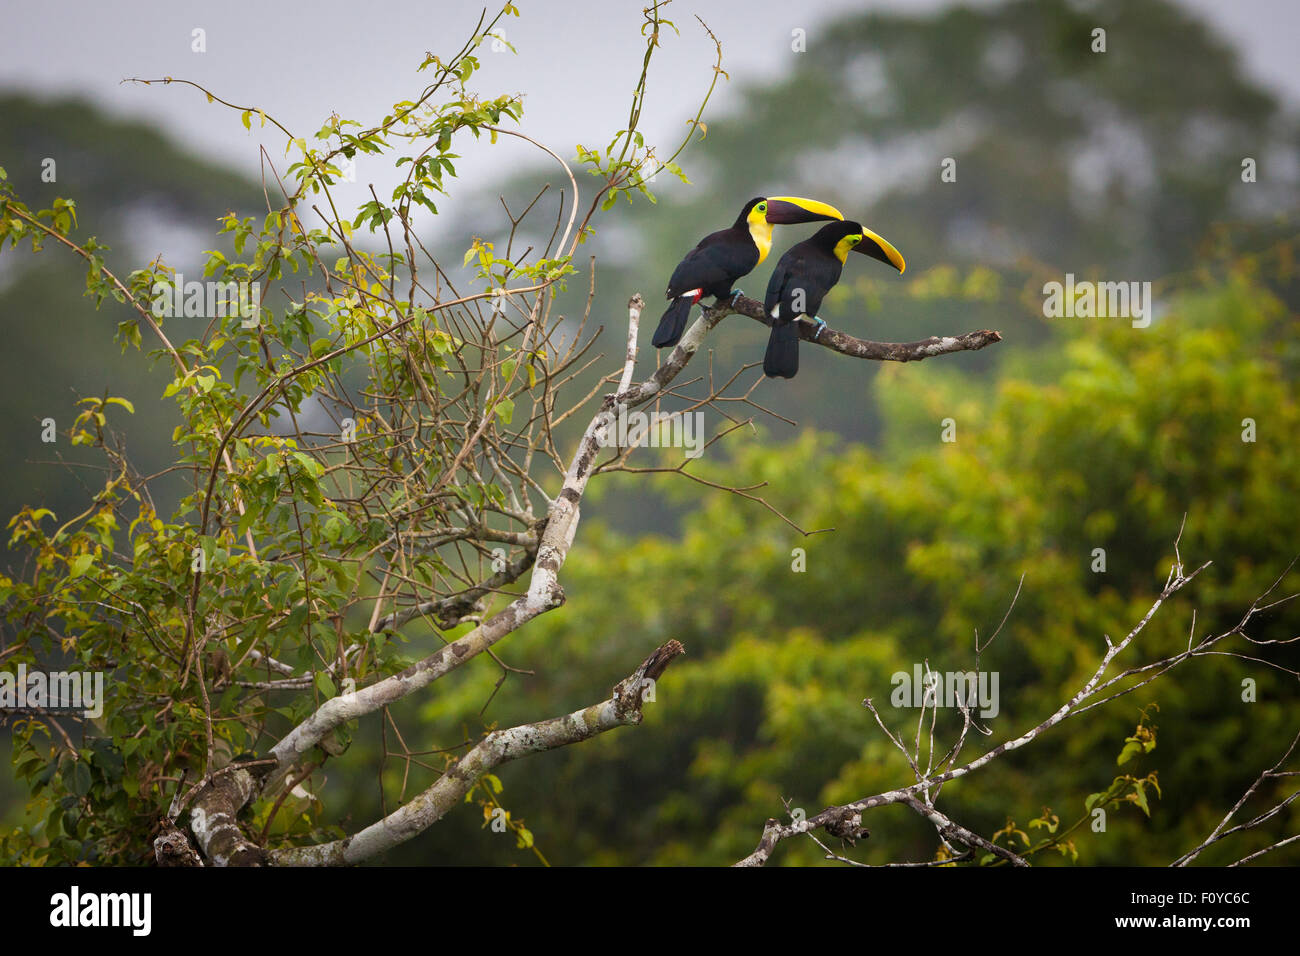 A pair of Yellow-throated Toucans, Ramphastos ambiguus swainsonii, in the forest canopy of Soberania national park, Republic of Panama. Stock Photo